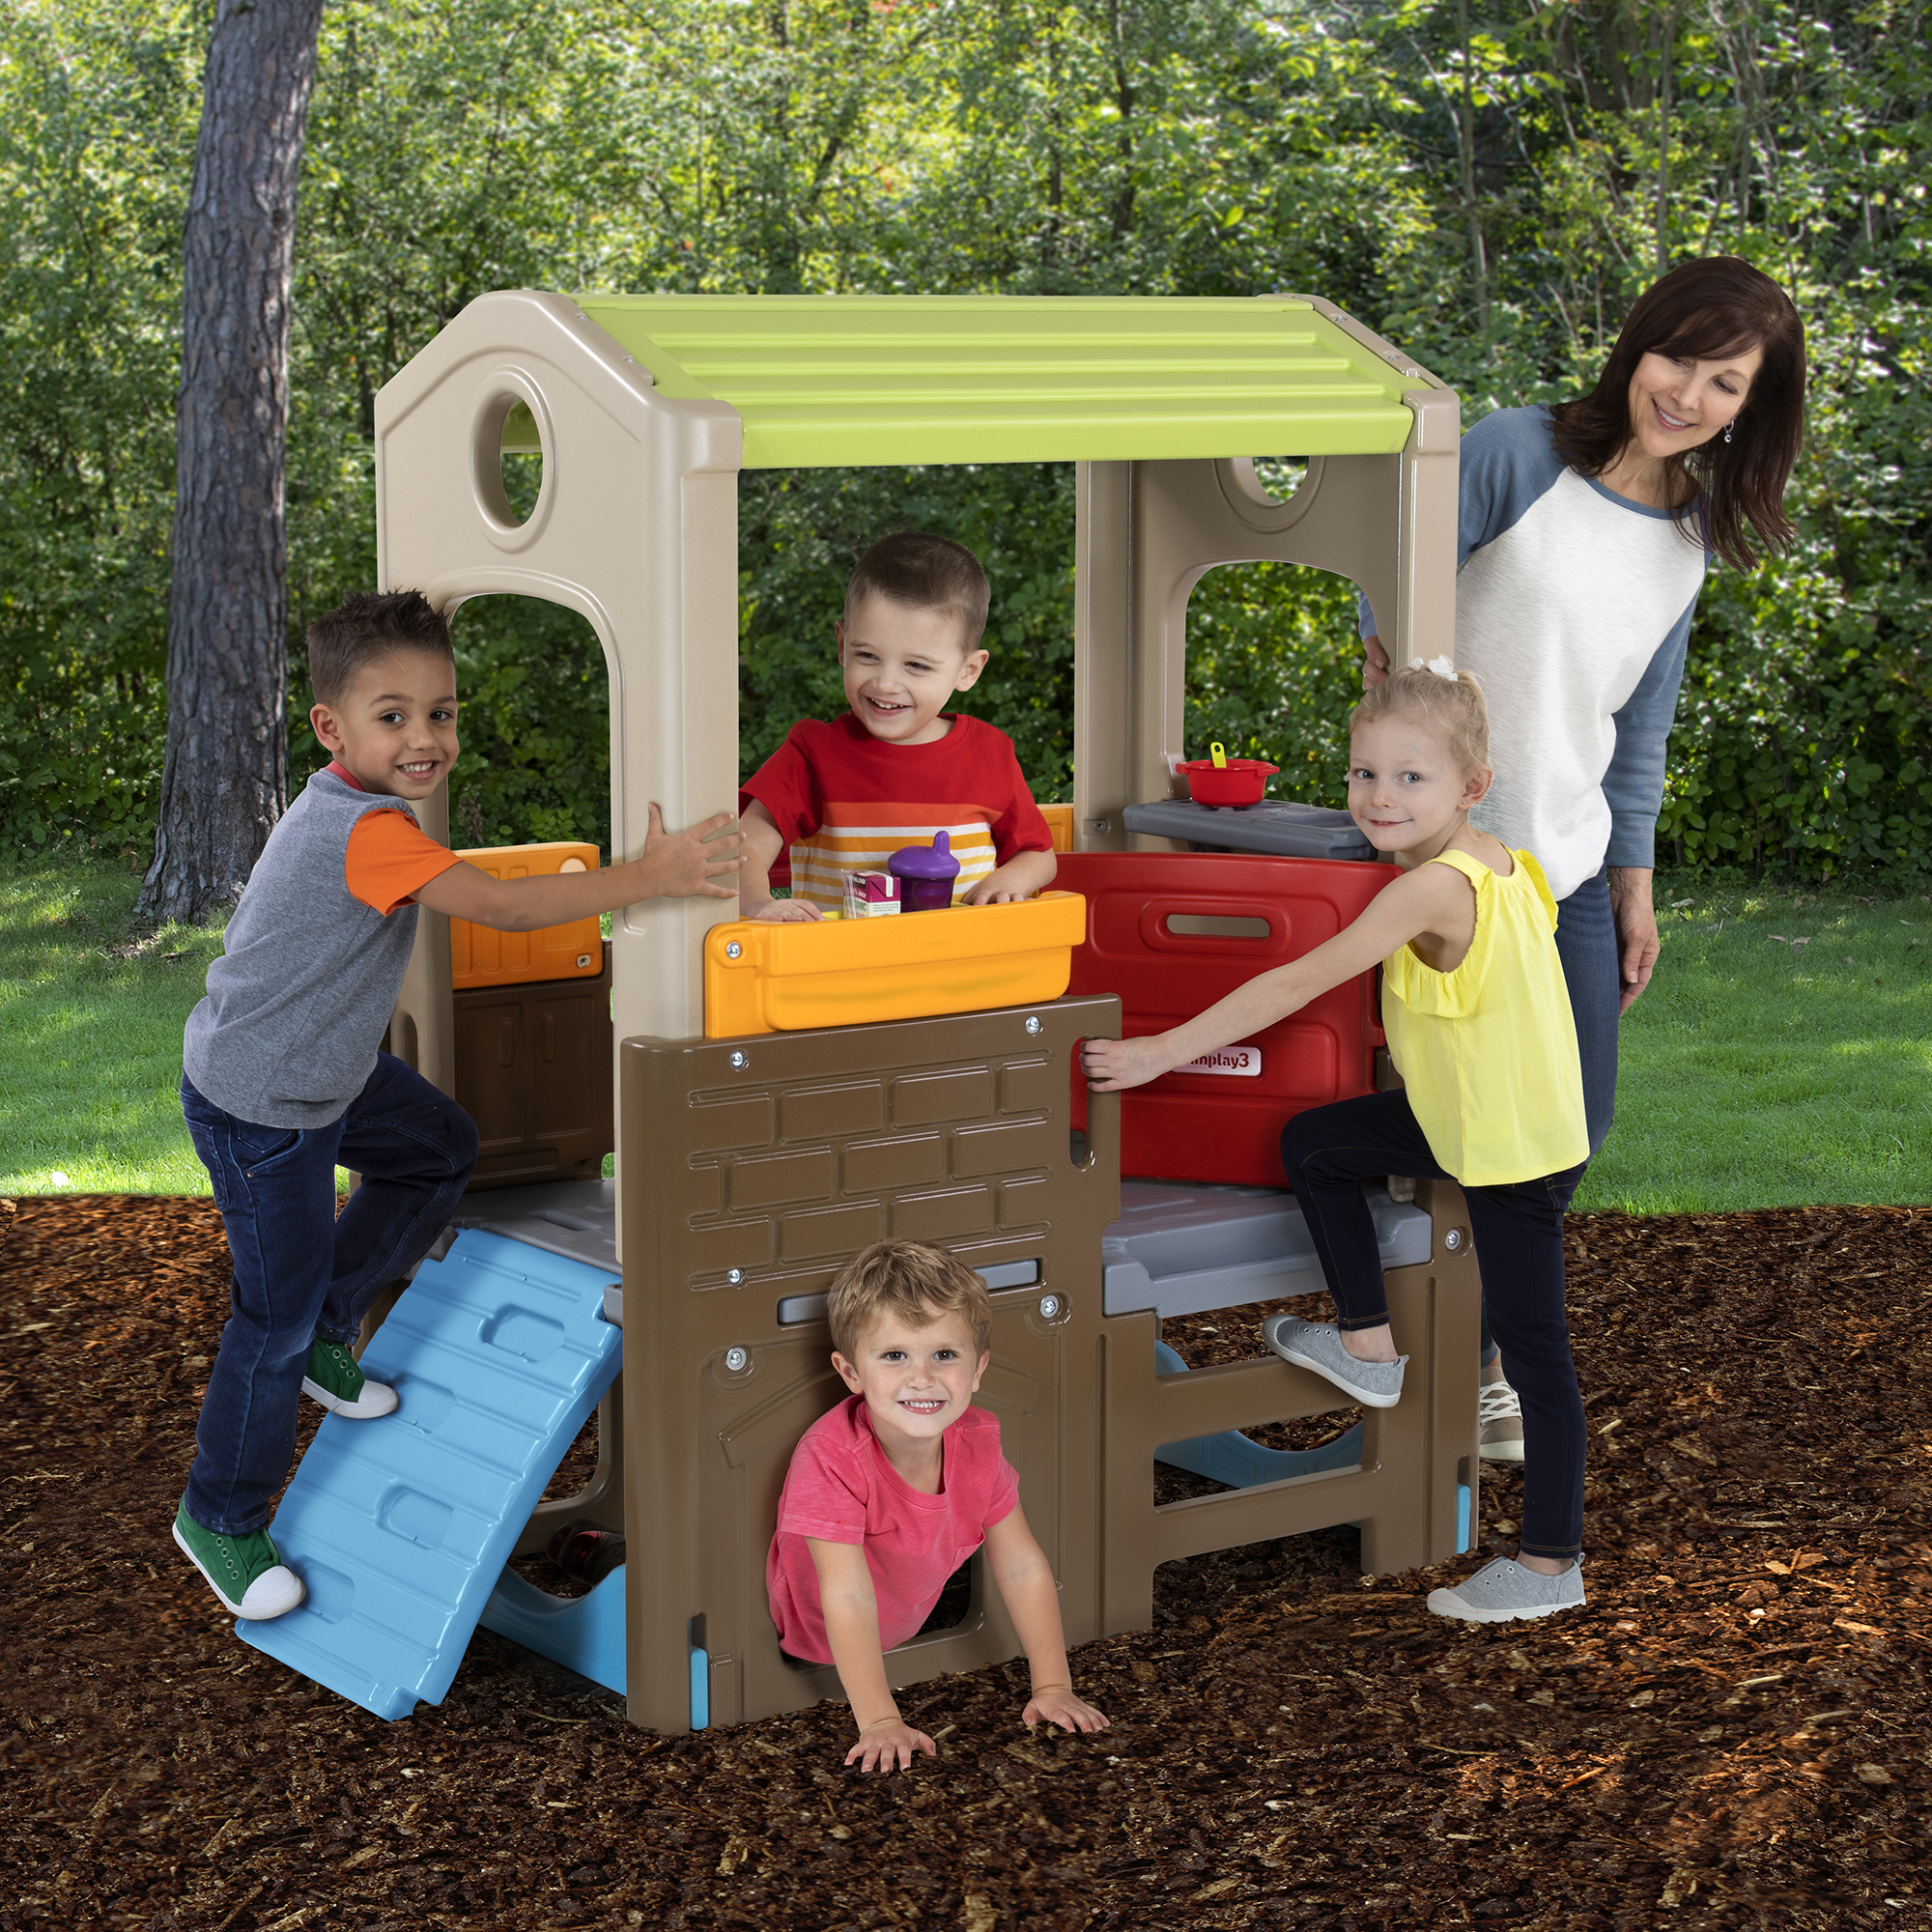 Simplay3 Young Explorers Discovery Playhouse - Indoor or Outdoor Clubhouse and Activity Playset for Toddlers and Kids, Made in USA